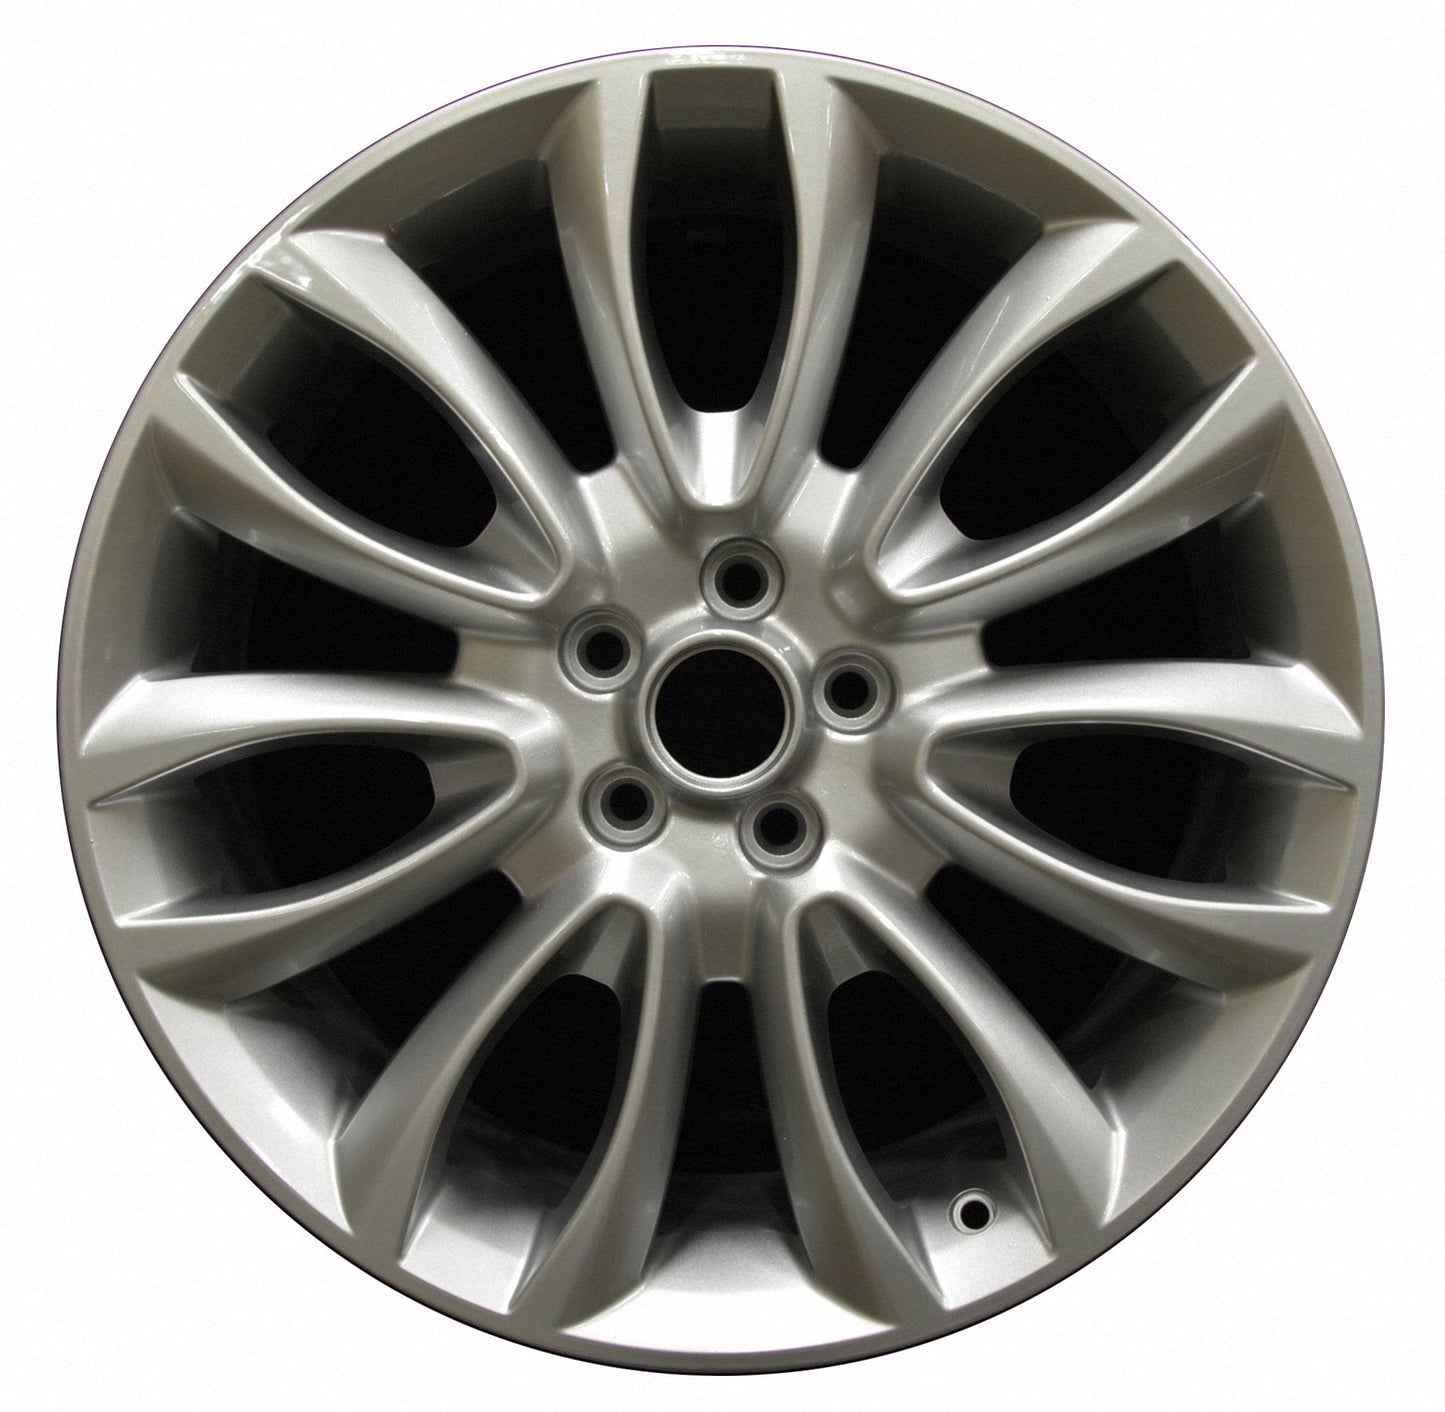 Lincoln MKC  2015, 2016, 2017, 2018 Factory OEM Car Wheel Size 19x8 Alloy WAO.10019.LS09.FF